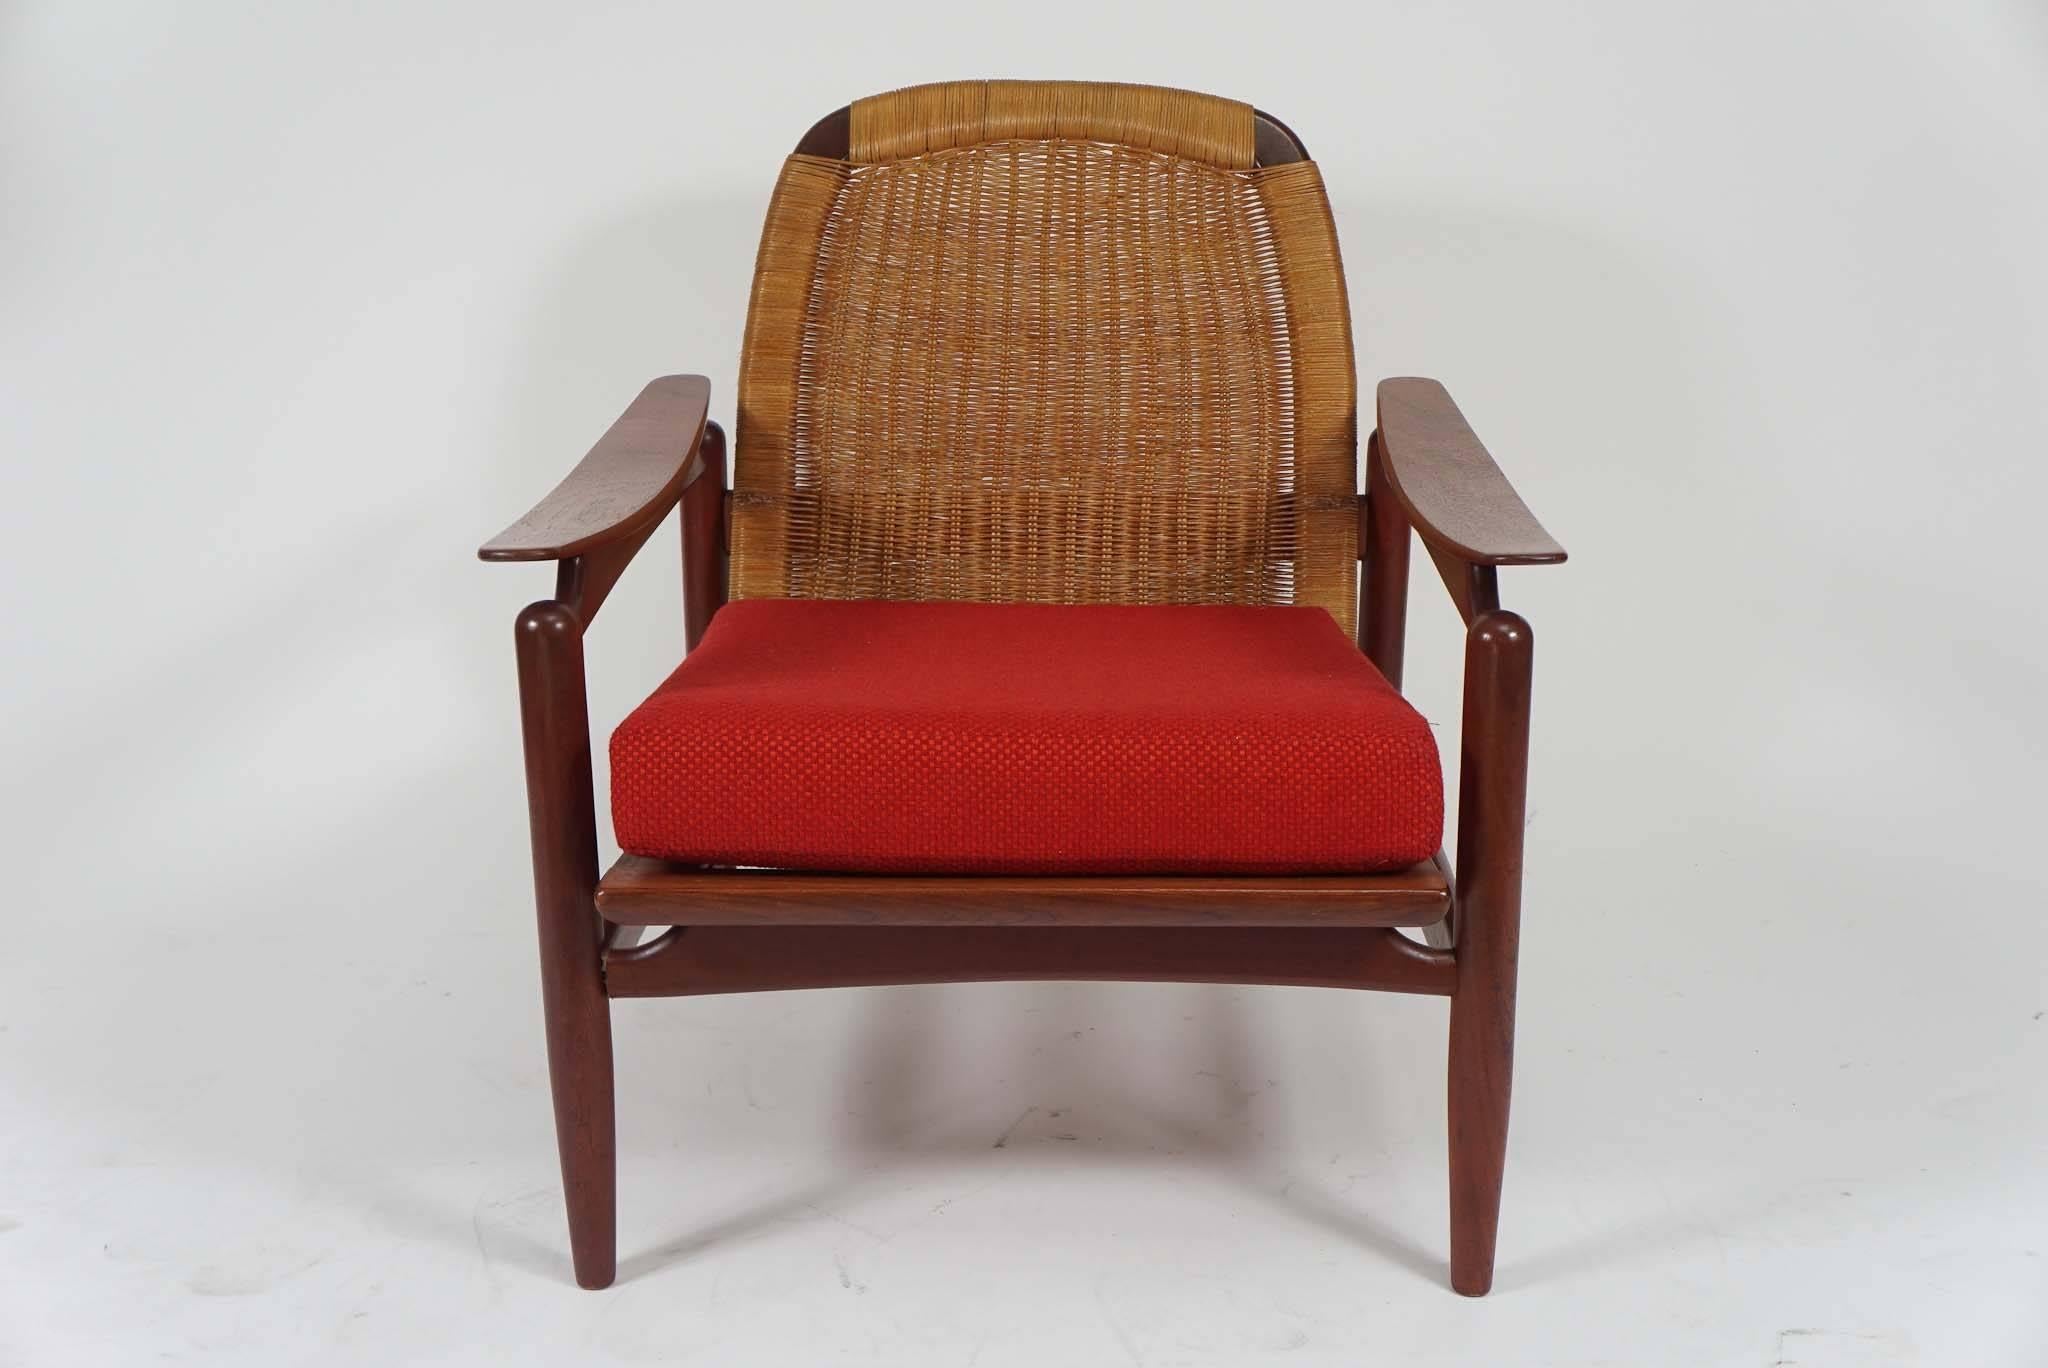 Fantastic pair of Mid-Century Danish modern lounge chairs. Teak and woven cane backs. Wonderful floating arm detail. Loose cushions can easily be reupholstered or use as is. Great condition.